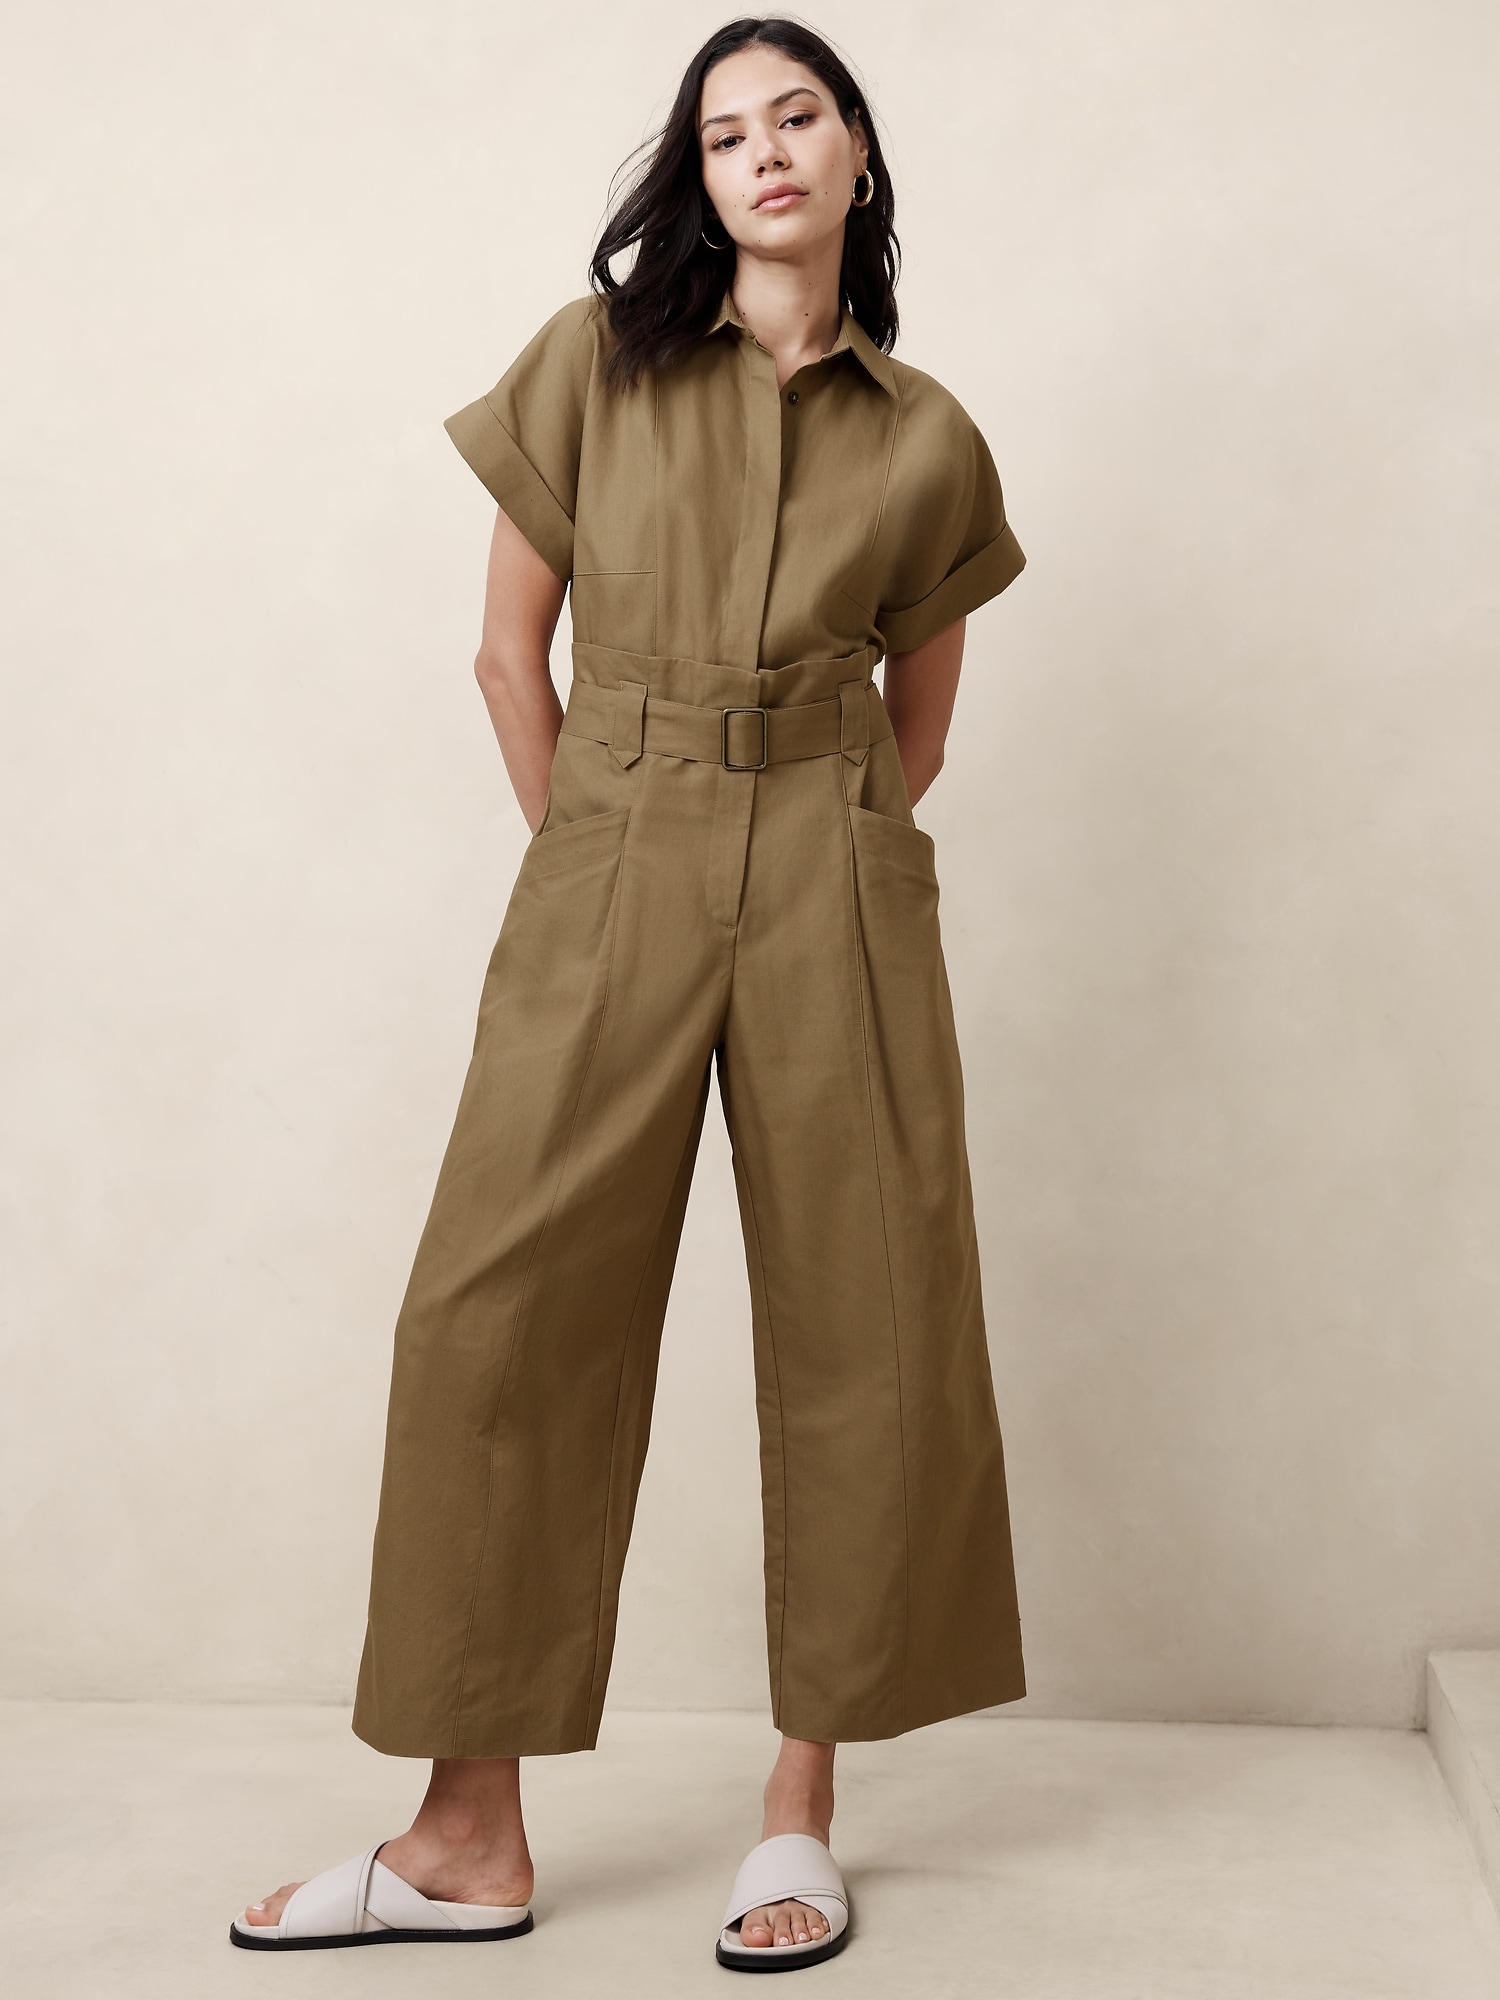 Womens Utility Jumpsuits